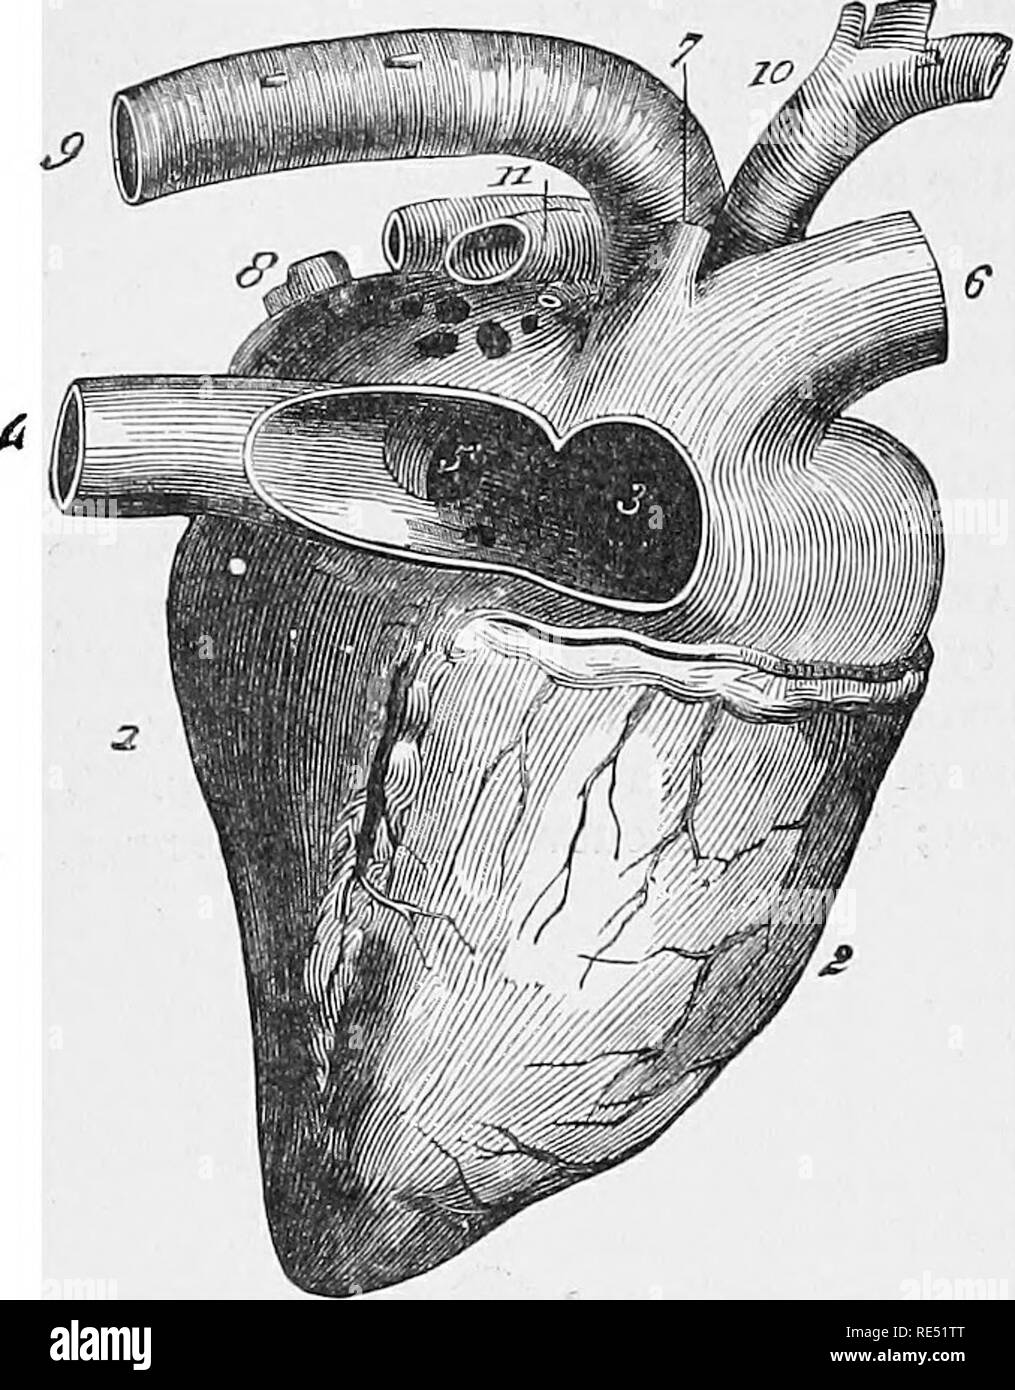 . The comparative anatomy of the domesticated animals. Veterinary anatomy. 916 EMBBYOLOGY. in the auricles; at a point corresponding to it, a septum is developed in their interior which remains incomplete during the whole of foetal life, being perforated by the foramen of Fig. 443. JBotal. With regard to the aortic bulb, it contracts and divides into two vessels, the aorta and pulmonary artery. The arteries are developed partly at the expense of the vessels of the primary circula- tion, and partly in the vascular lamina of the embryo. The heart, when it was only a simple cylindrical tube, pres Stock Photo